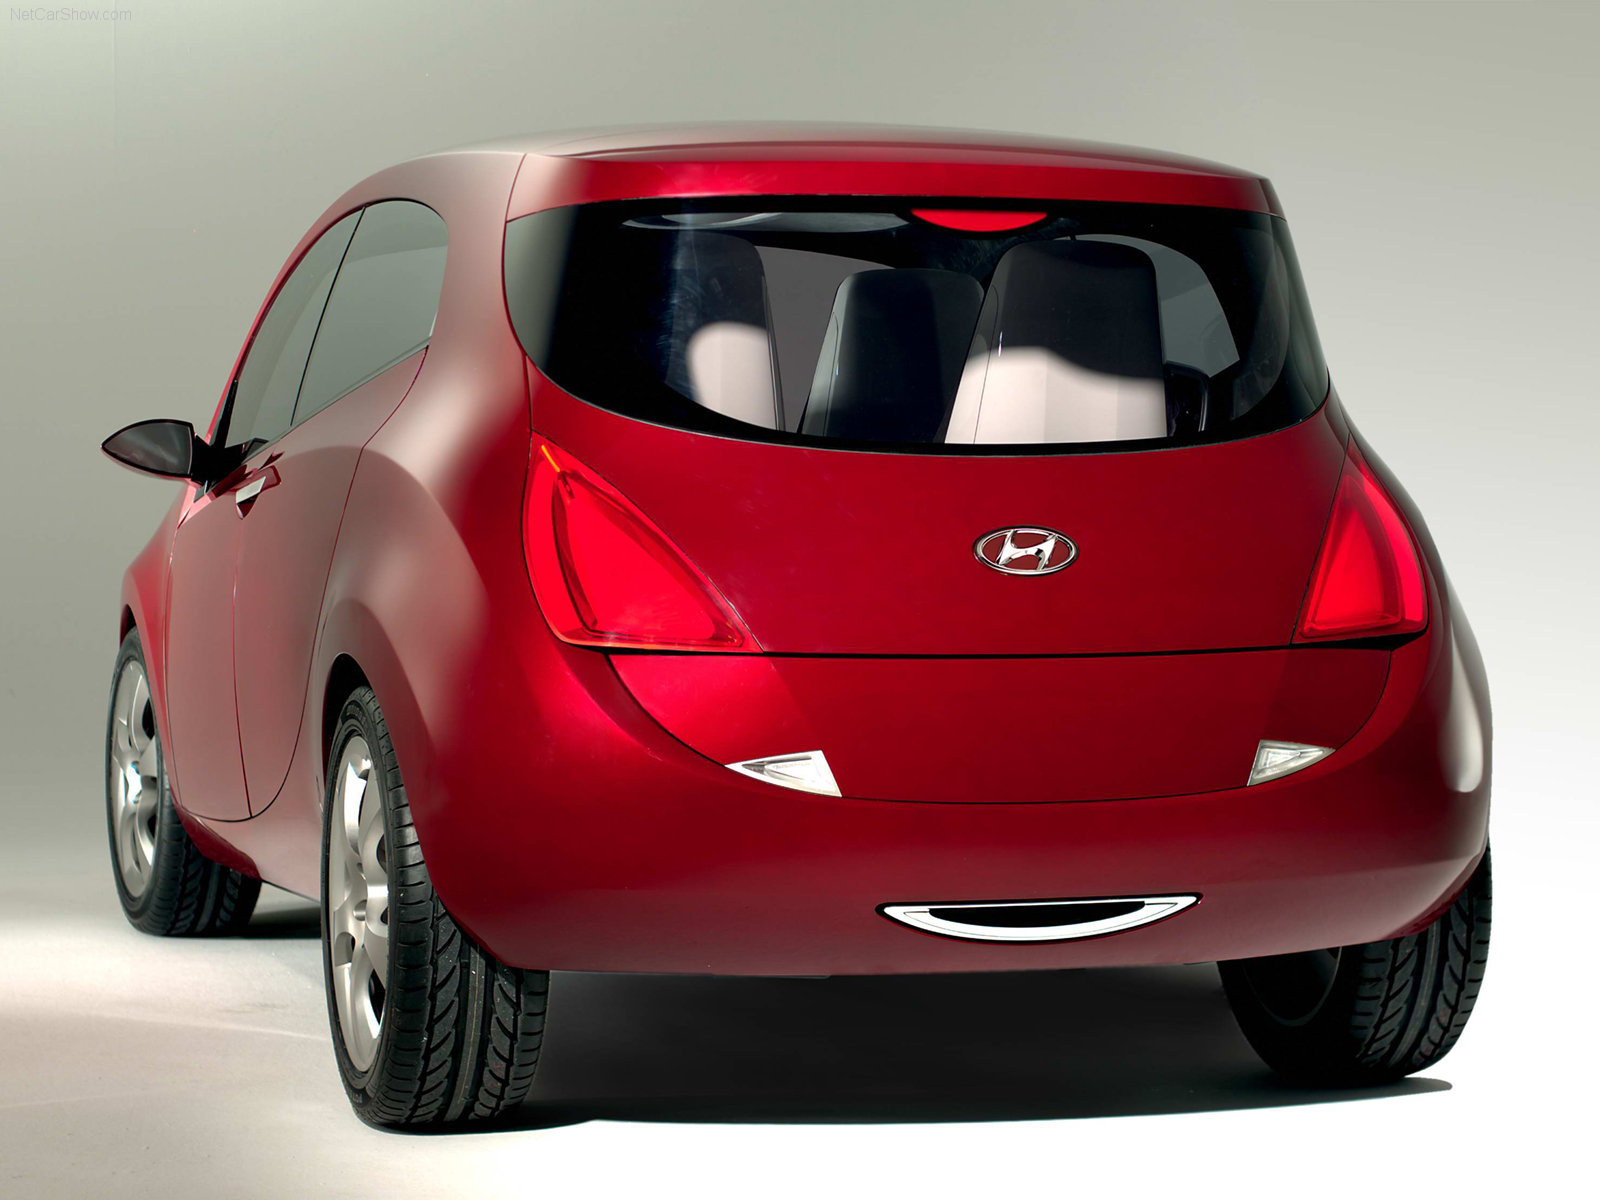 Hyundai HED 1 Concept 2005 Hyundai-HED_1_Concept-2005-1600-03